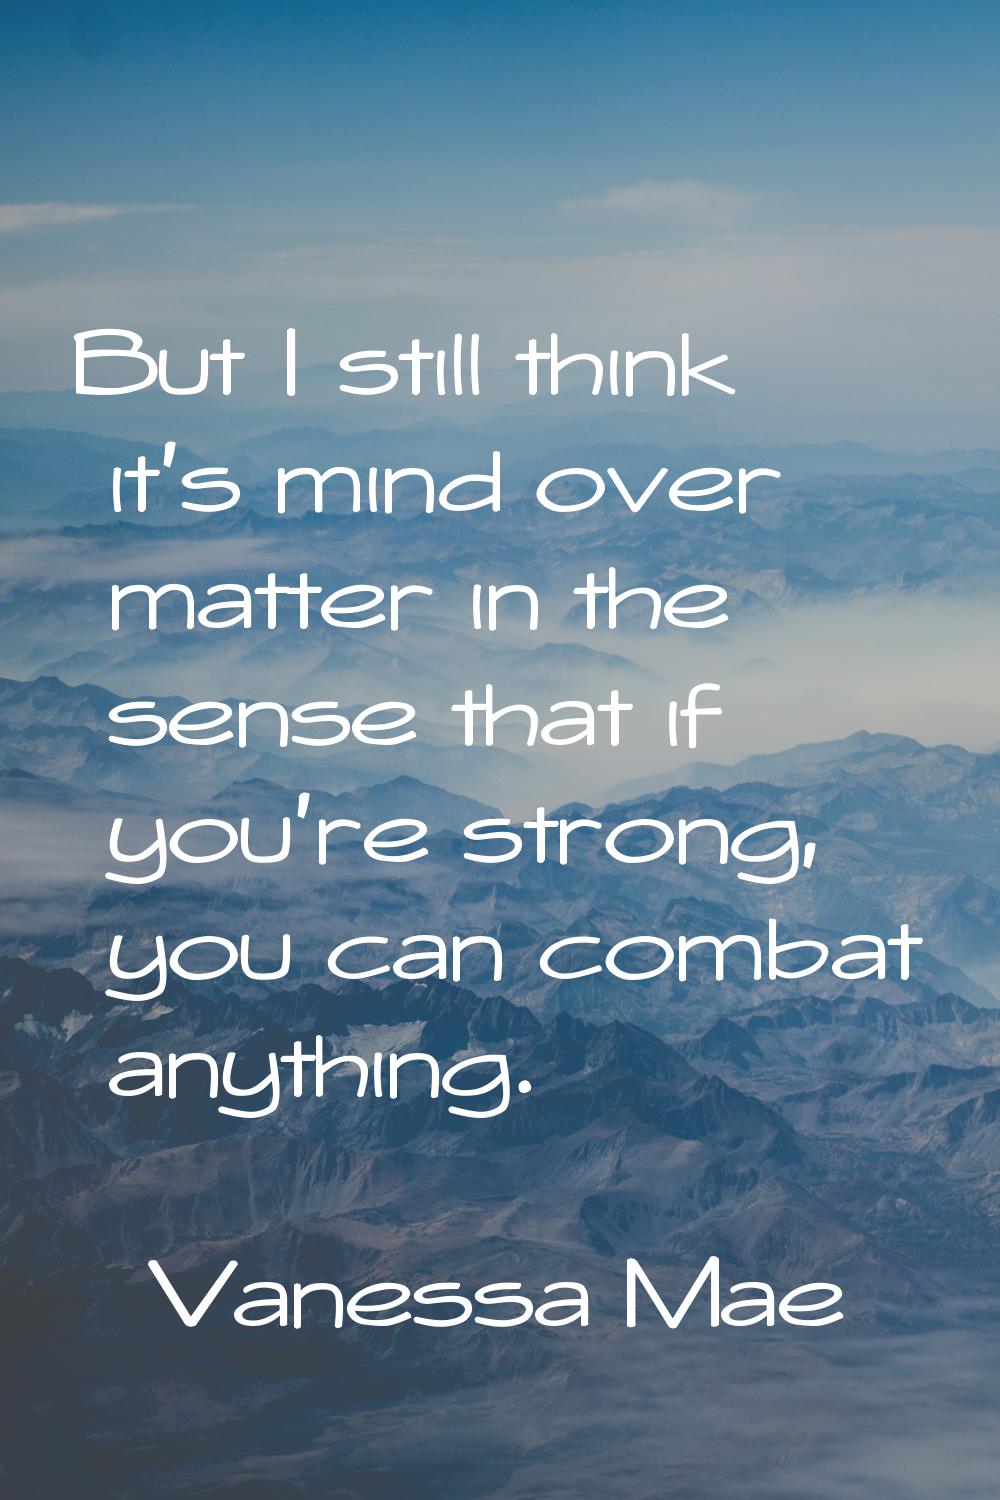 But I still think it's mind over matter in the sense that if you're strong, you can combat anything